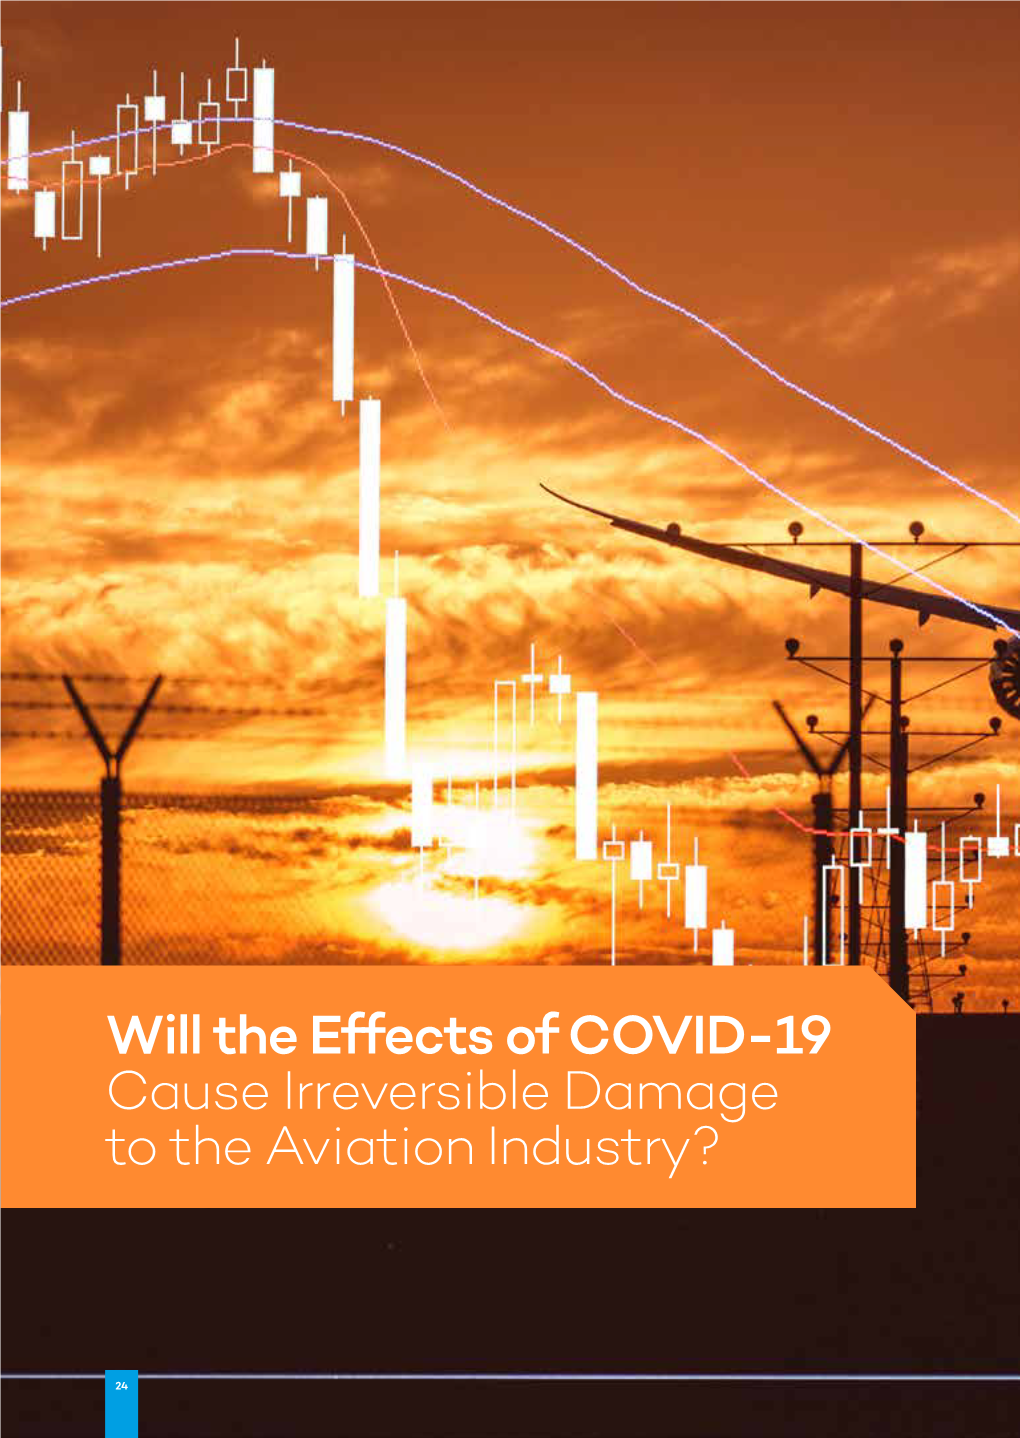 Will the Effects of COVID-19 Cause Irreversible Damage to the Aviation Industry?